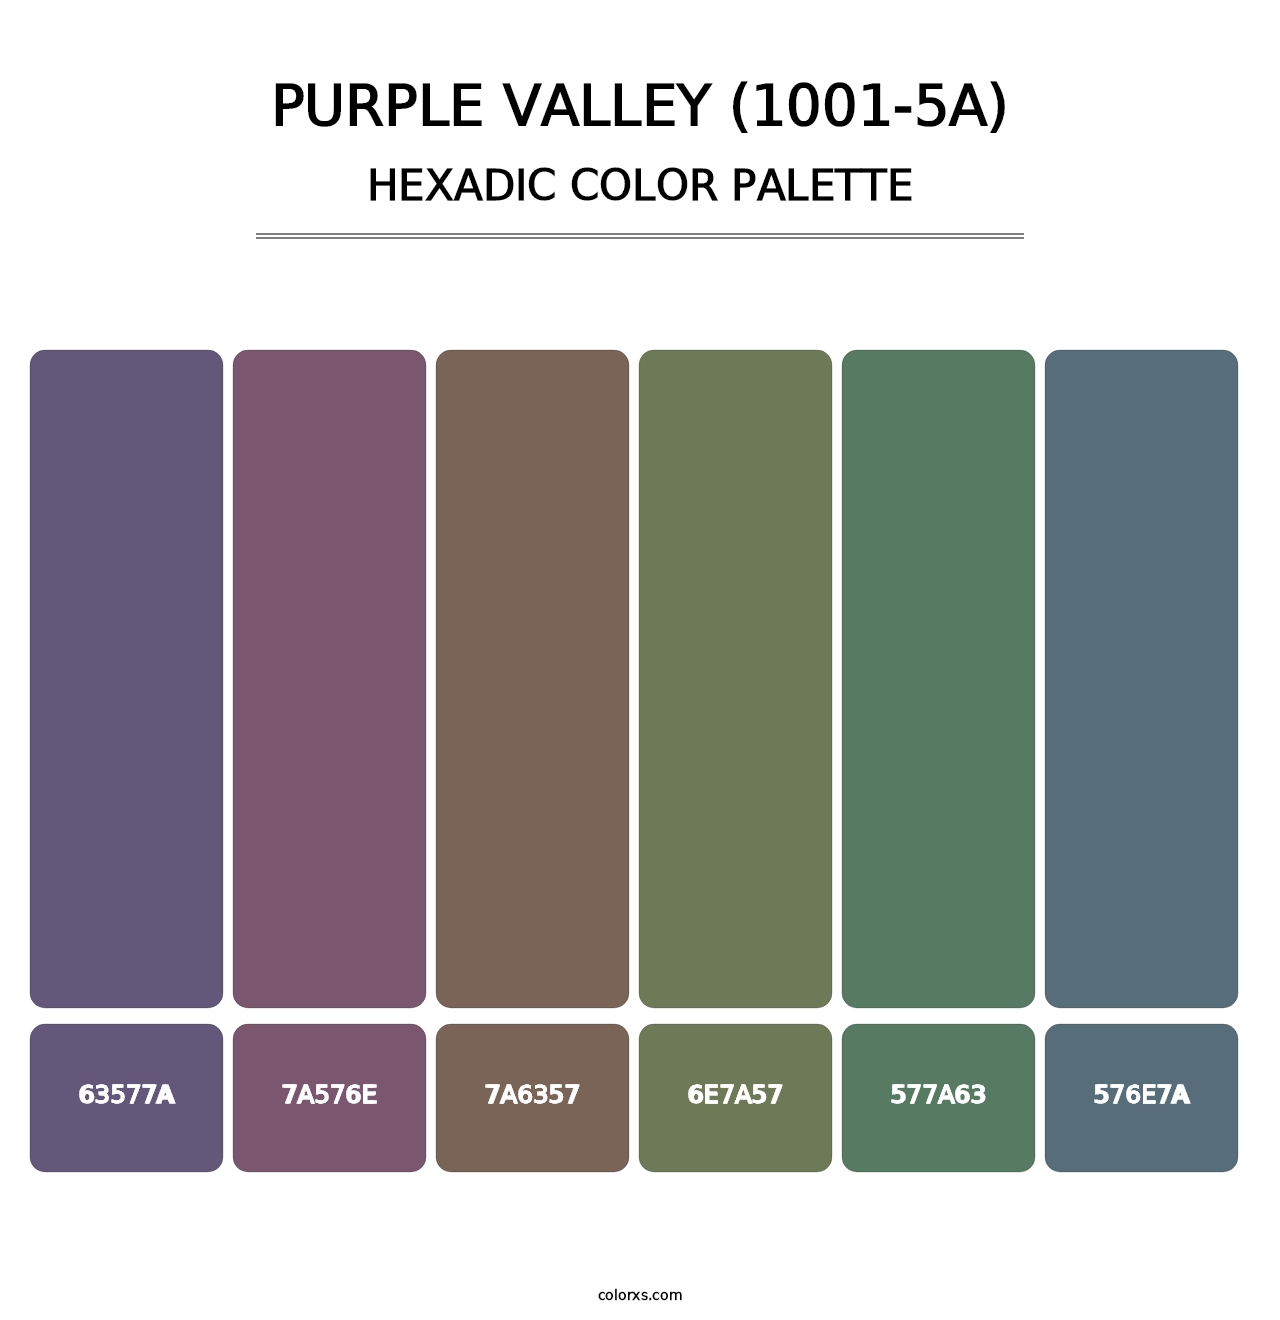 Purple Valley (1001-5A) - Hexadic Color Palette